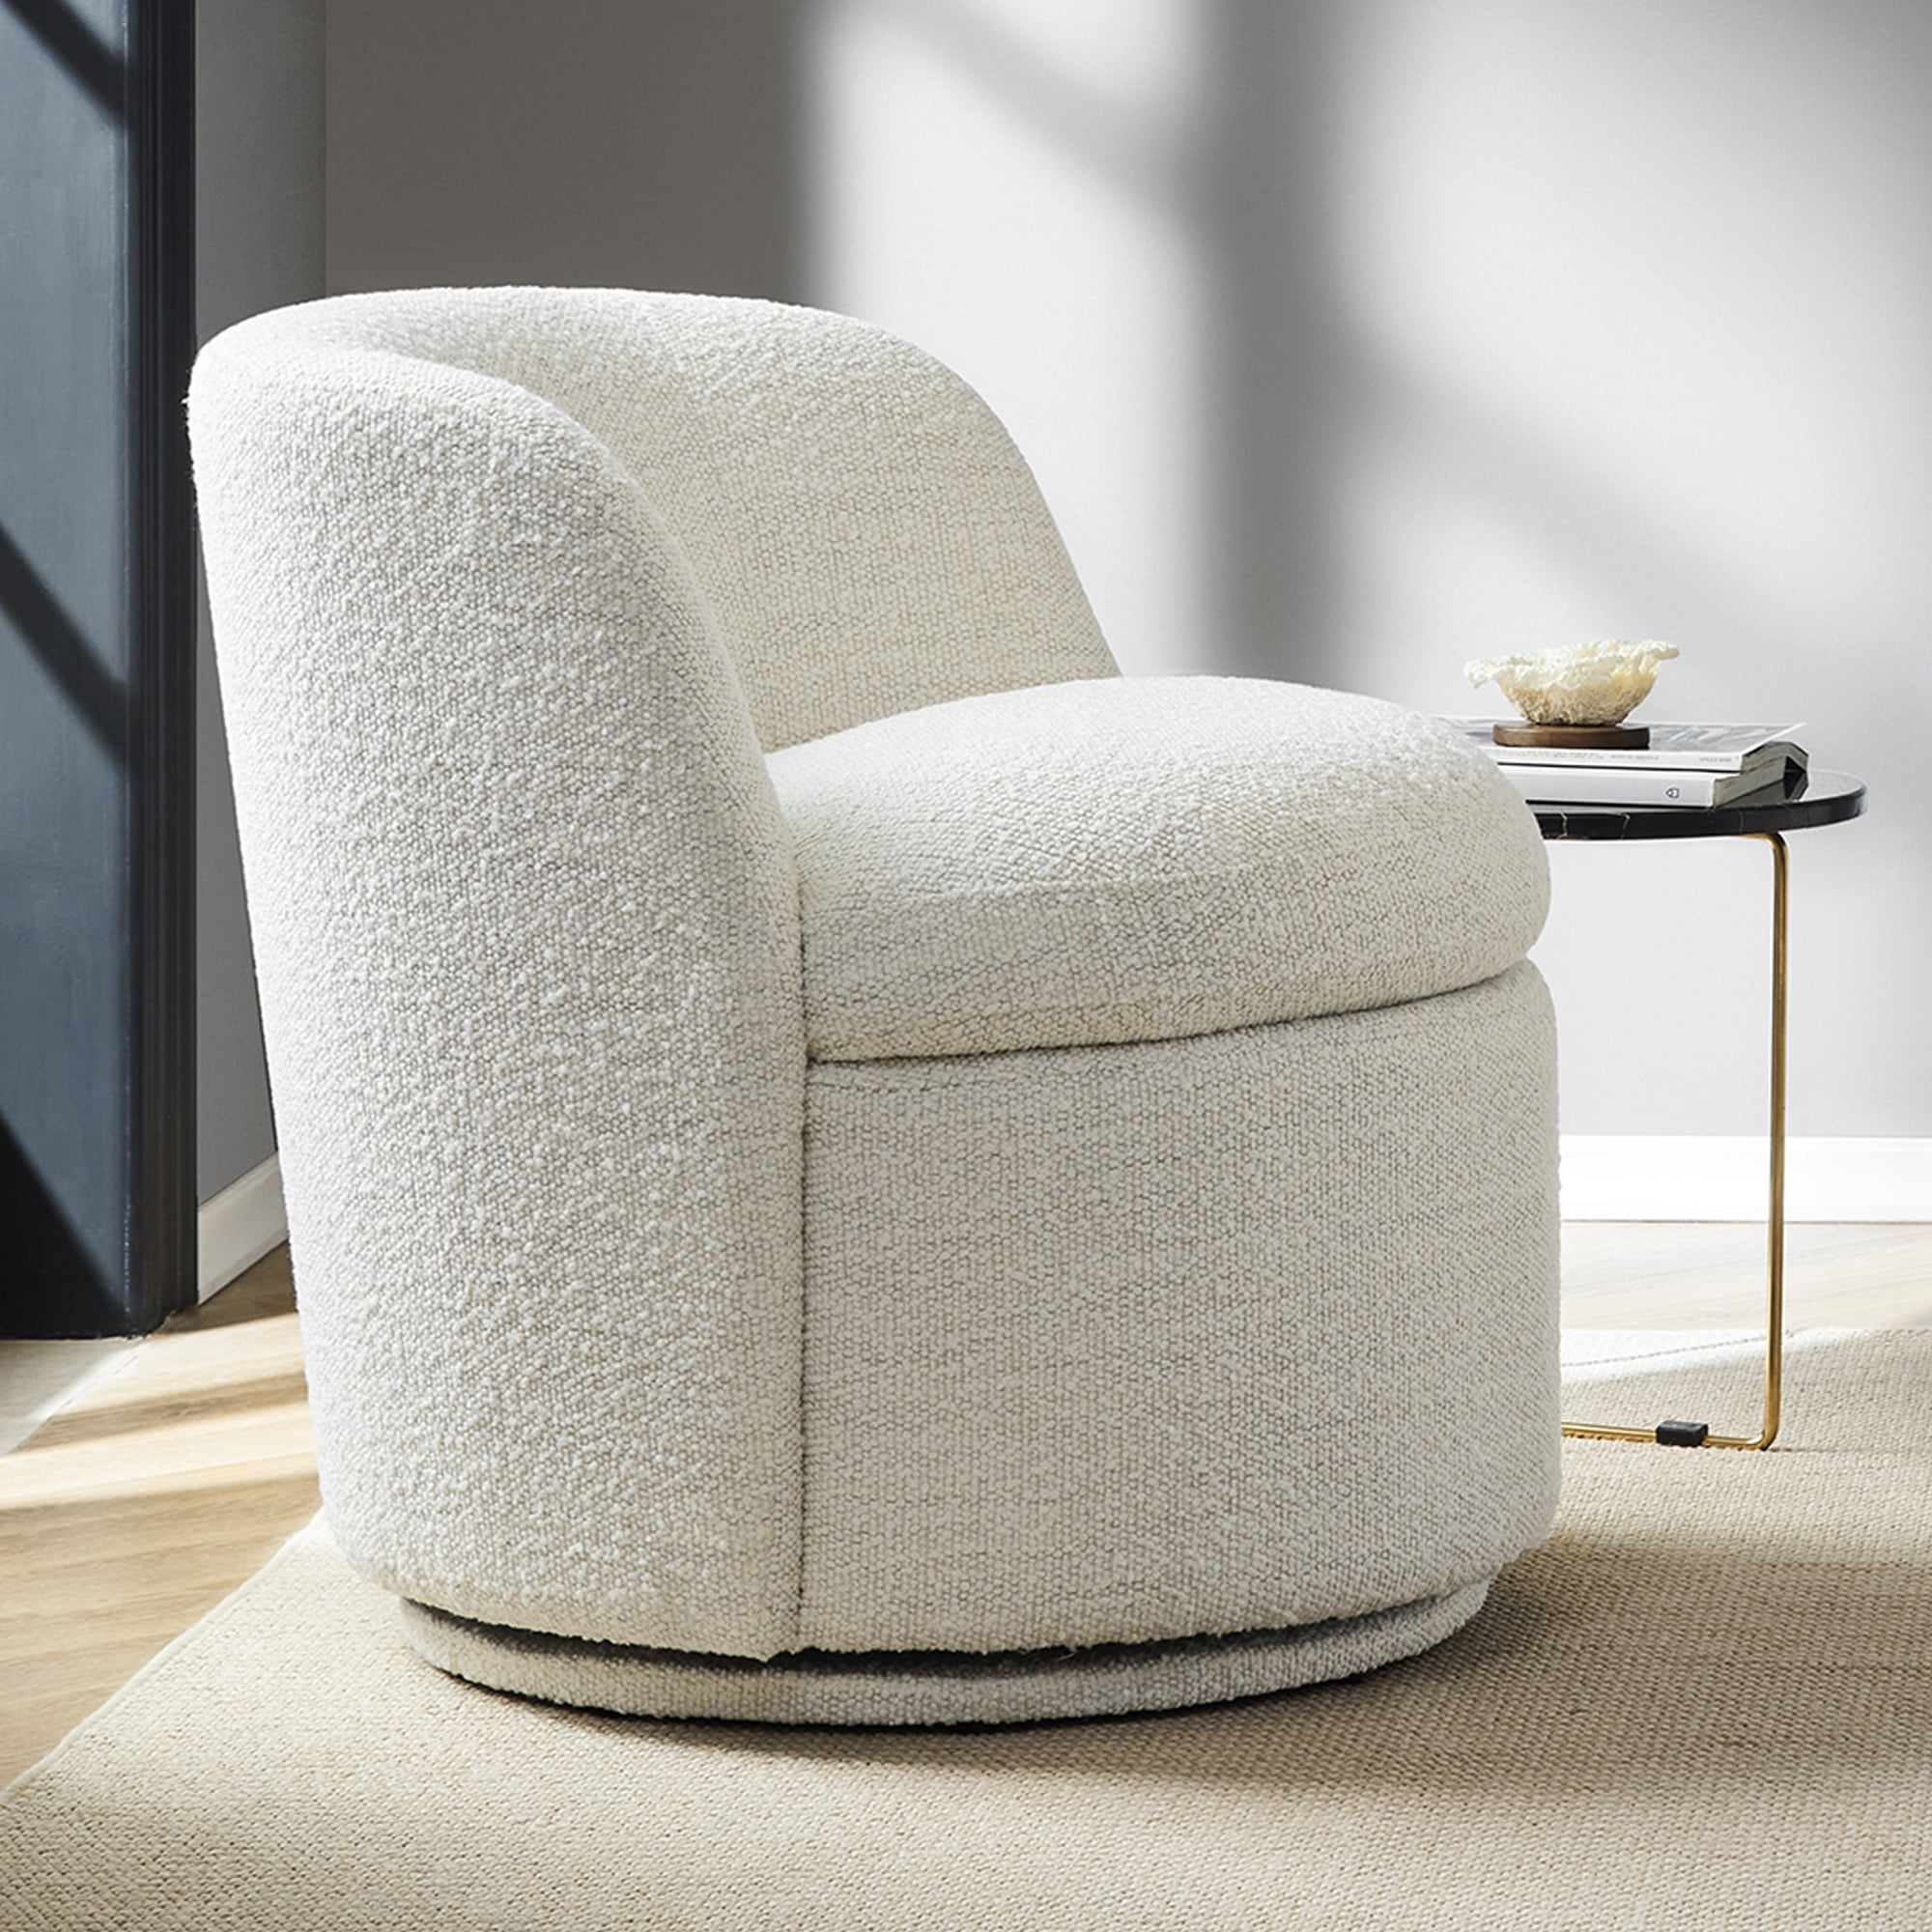 CHITA Swivel Accent Chair Armchair, Round Barrel Chairs in Fabric for Living Room Bedroom, Boucle Accent Chair, White